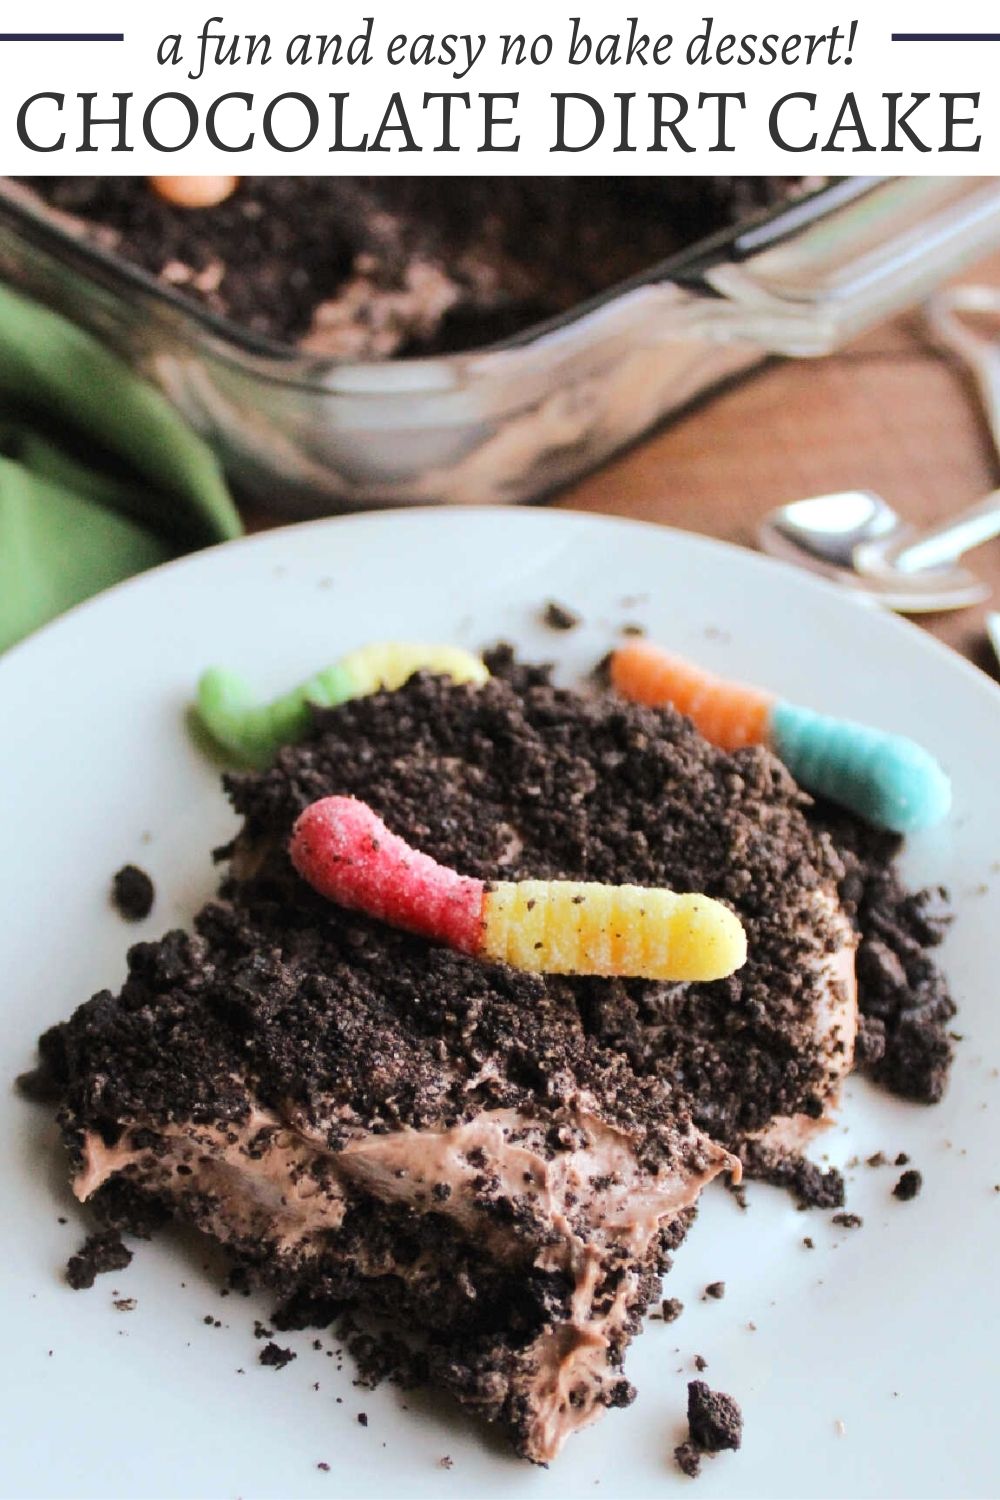 Chocolate dirt cake features layers of crushed Oreos and a fluffy chocolate pudding mixture that looks like dirt, but tastes like heaven. It is a great no bake summer dessert that will have everyone coming back for seconds.